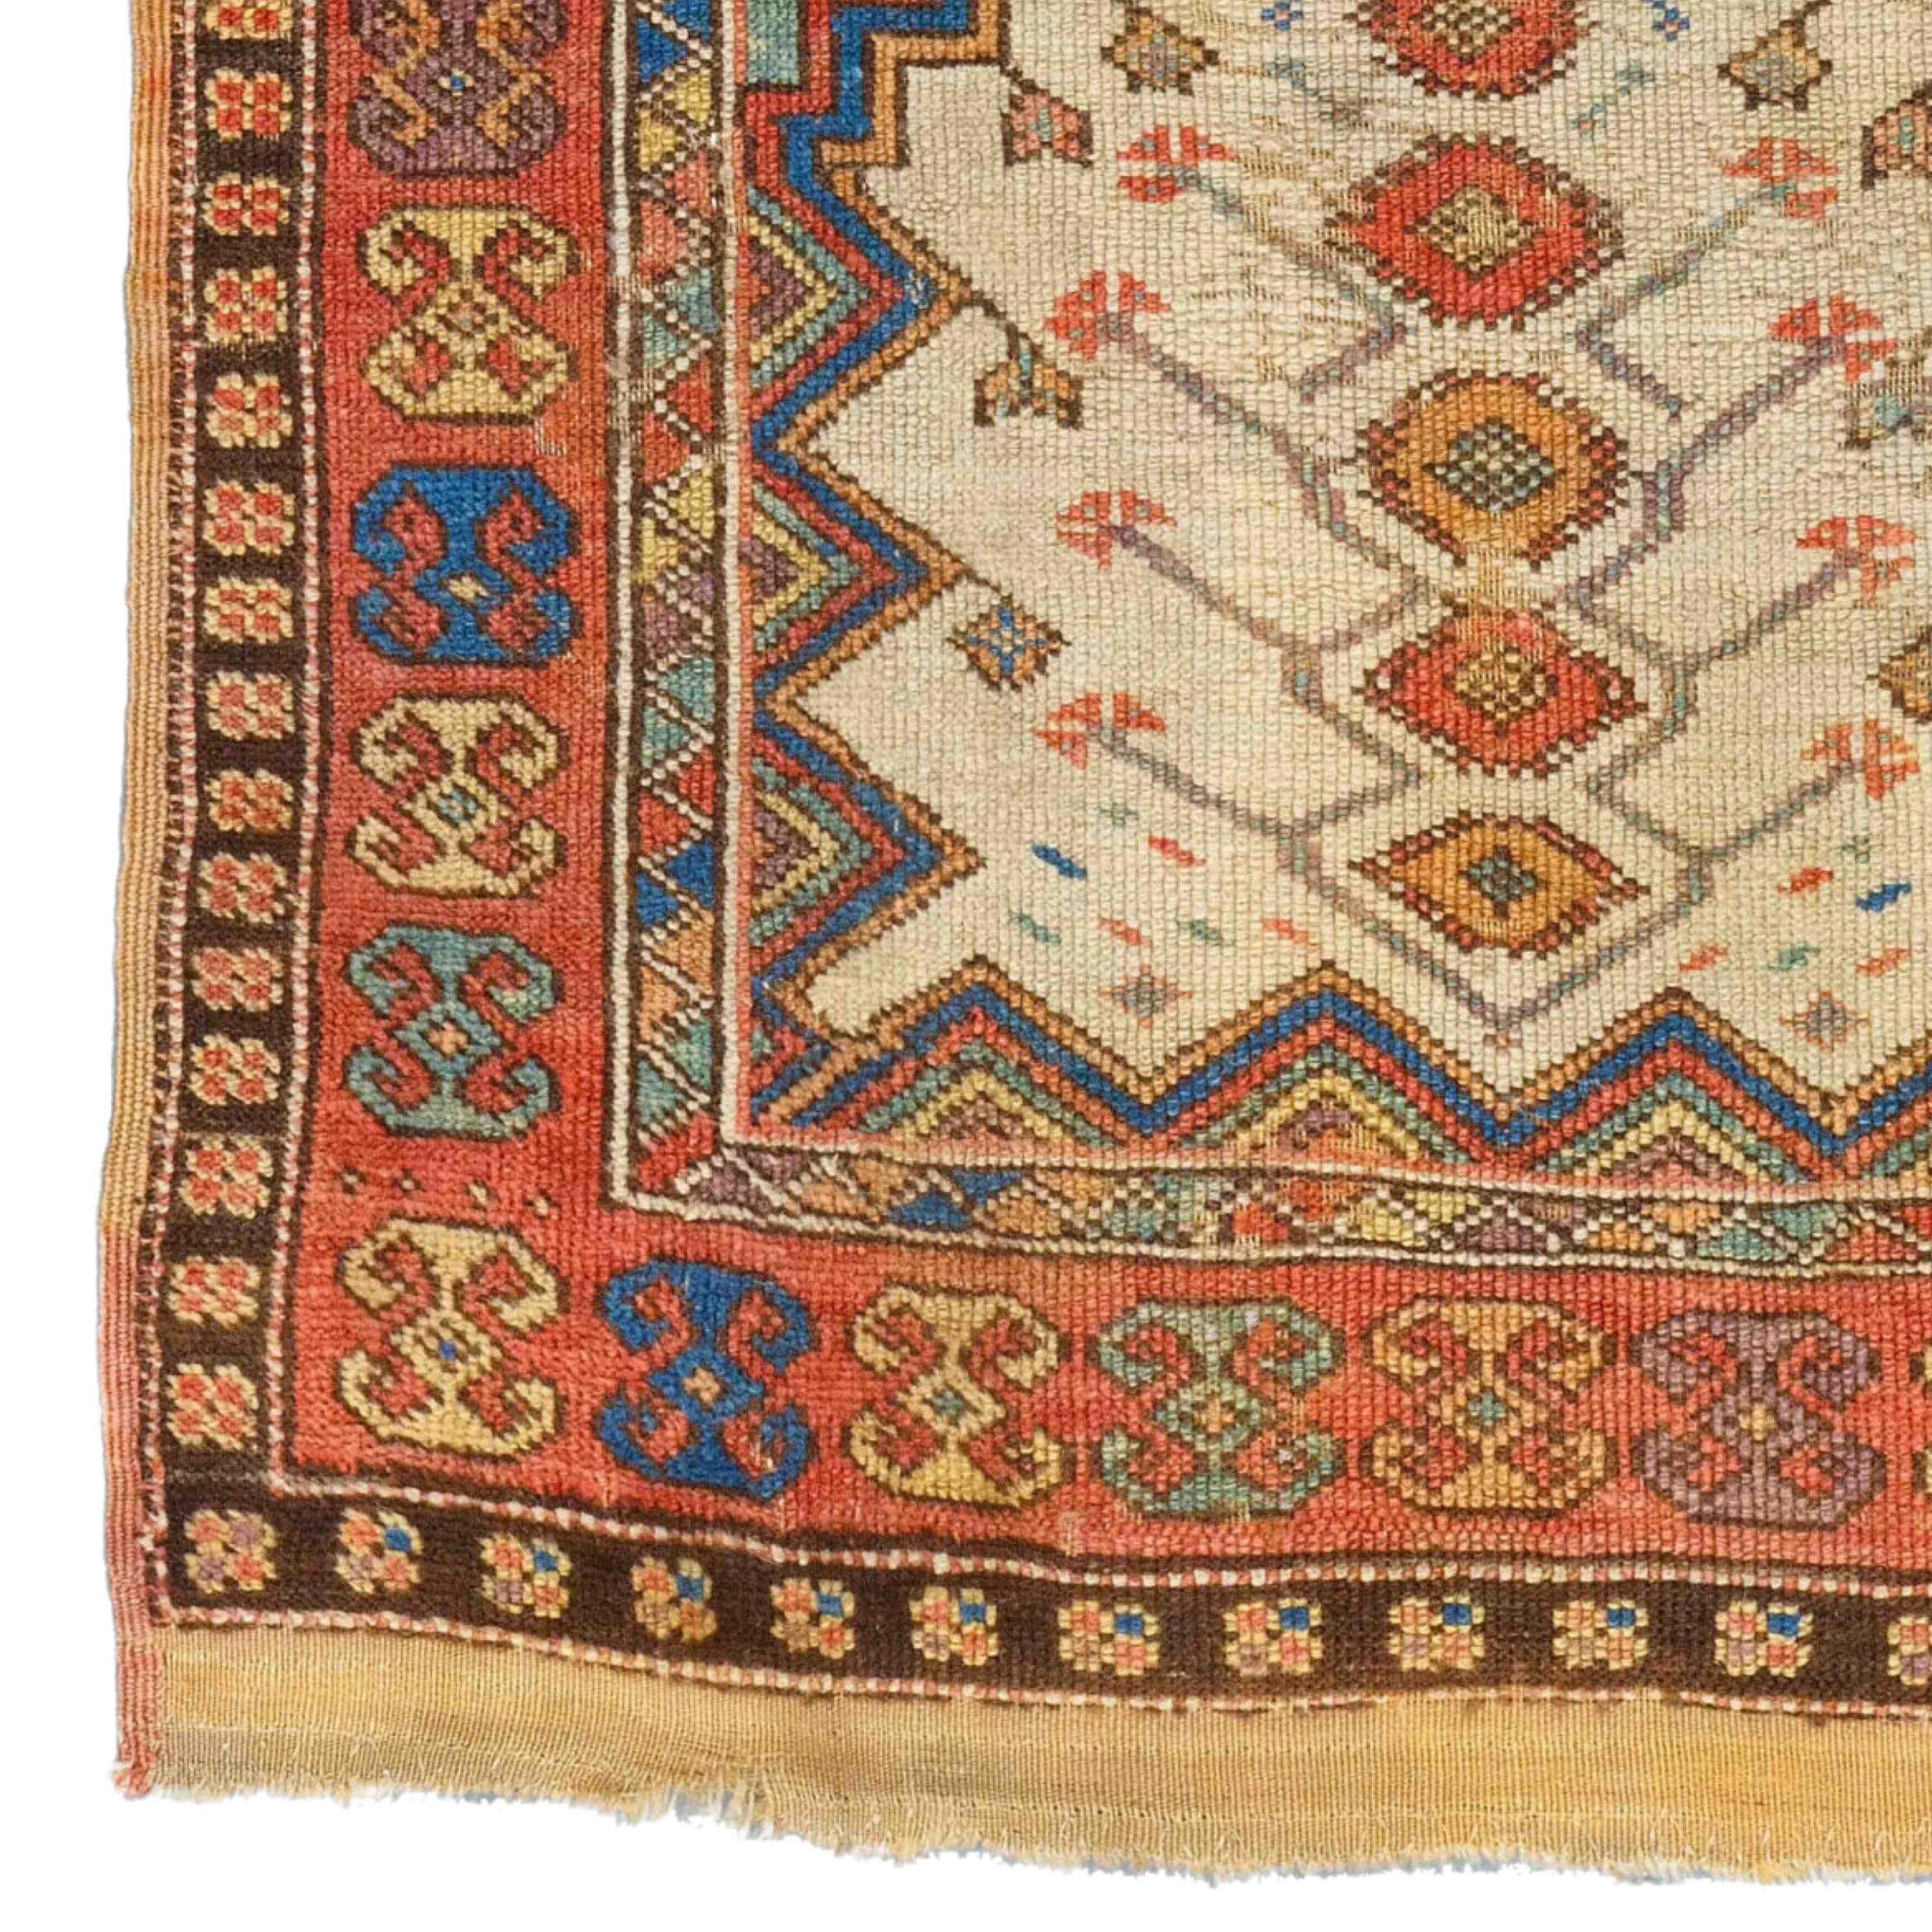 Antique Konya Rug - Early 19th Century Central Anatolian Konya Prayer Rug Size 96 x 132 cm (3,14 x 4,33 ft)

Notable is a type of prayer rug with columns and arches that seems descended from earlier rural rugs and ultimately from 16th-century